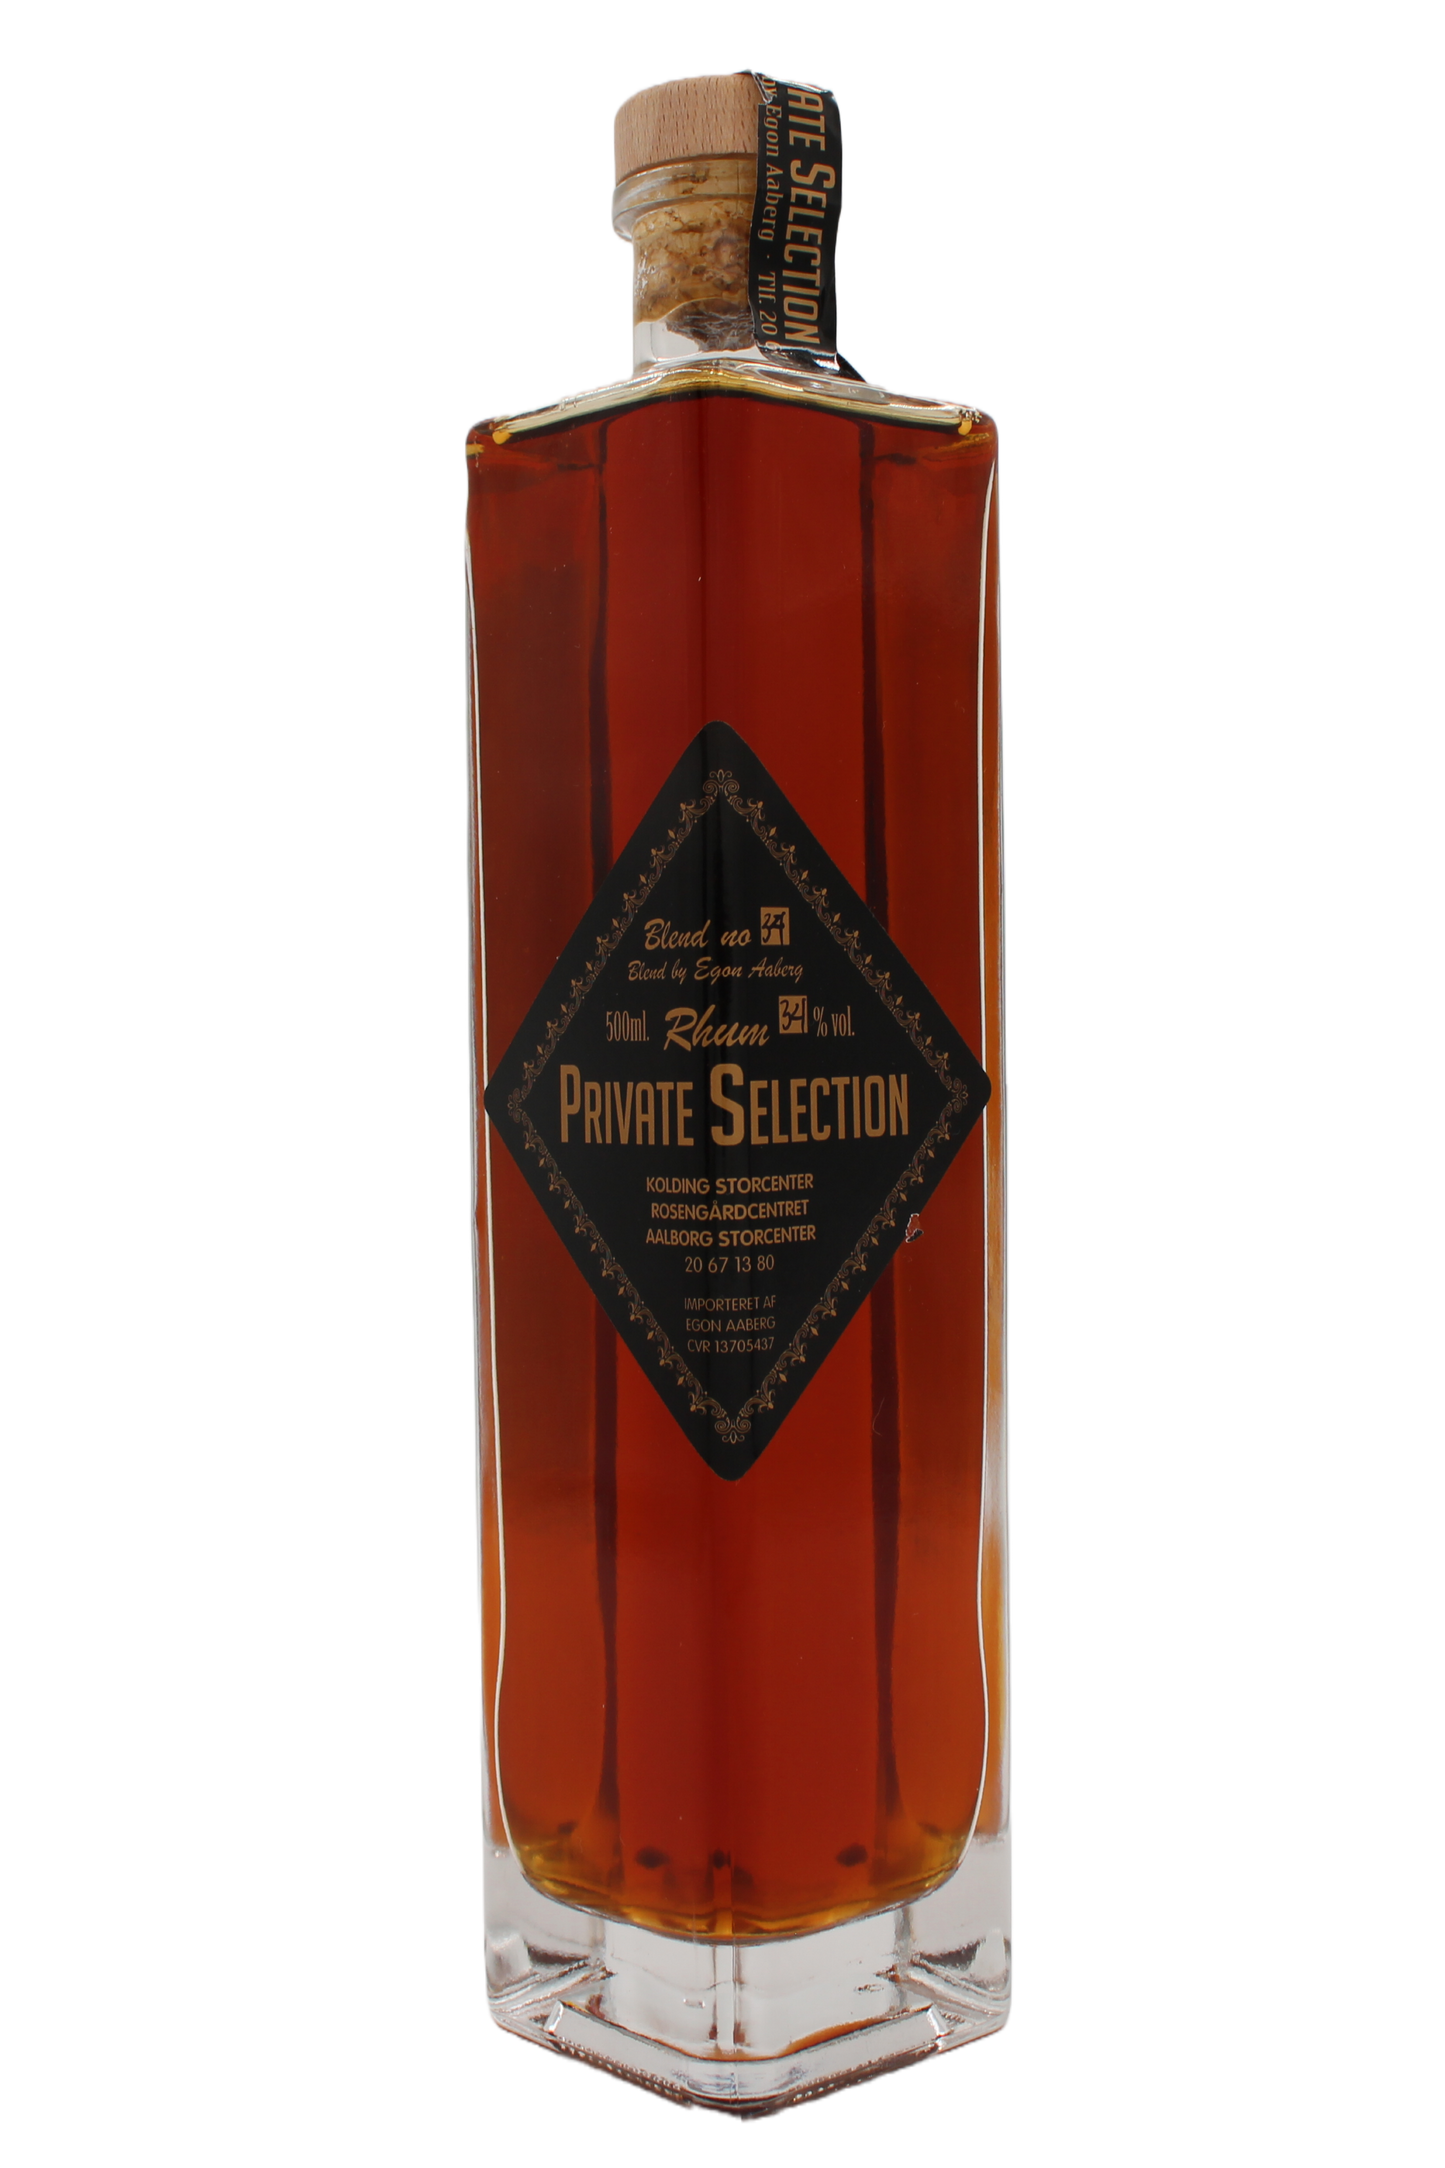 Private Selection - Blend no. 34